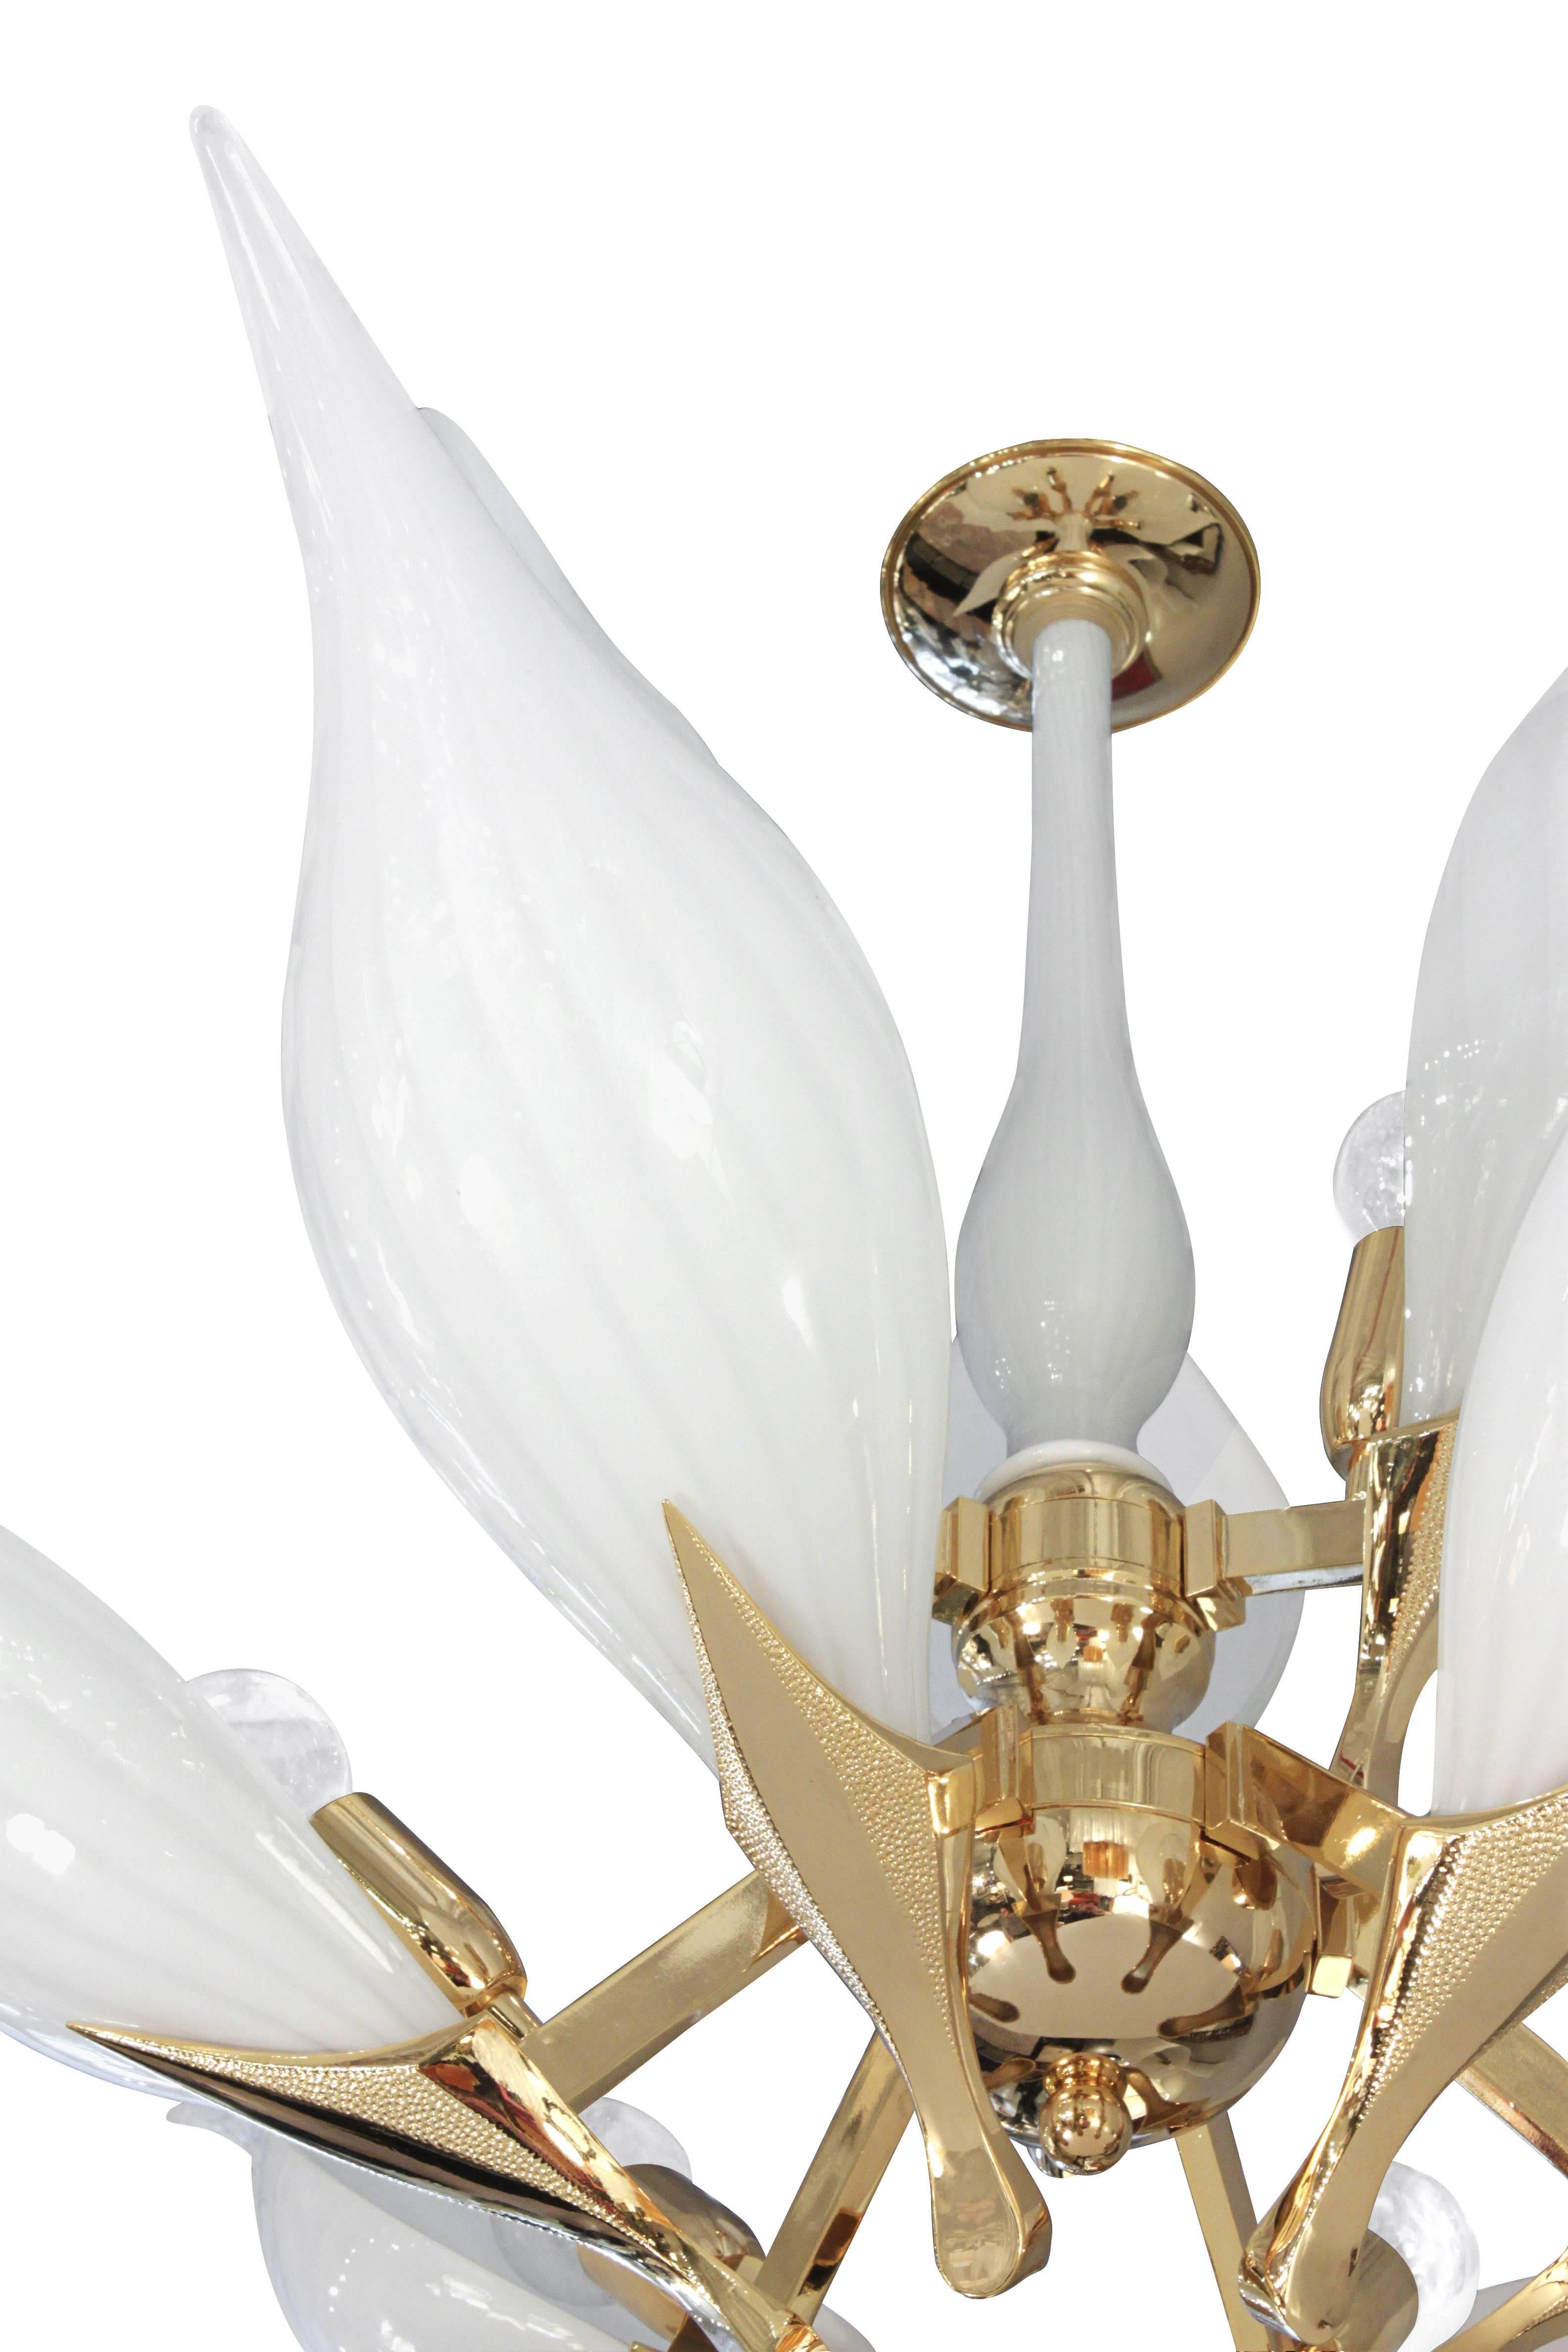 Elegant two-tier chandelier with striated glass petals and gold-plated hardware by Franco Luce, Murano Italy, 1970s.
Height of chandelier is 23 inches without chain and canopy.